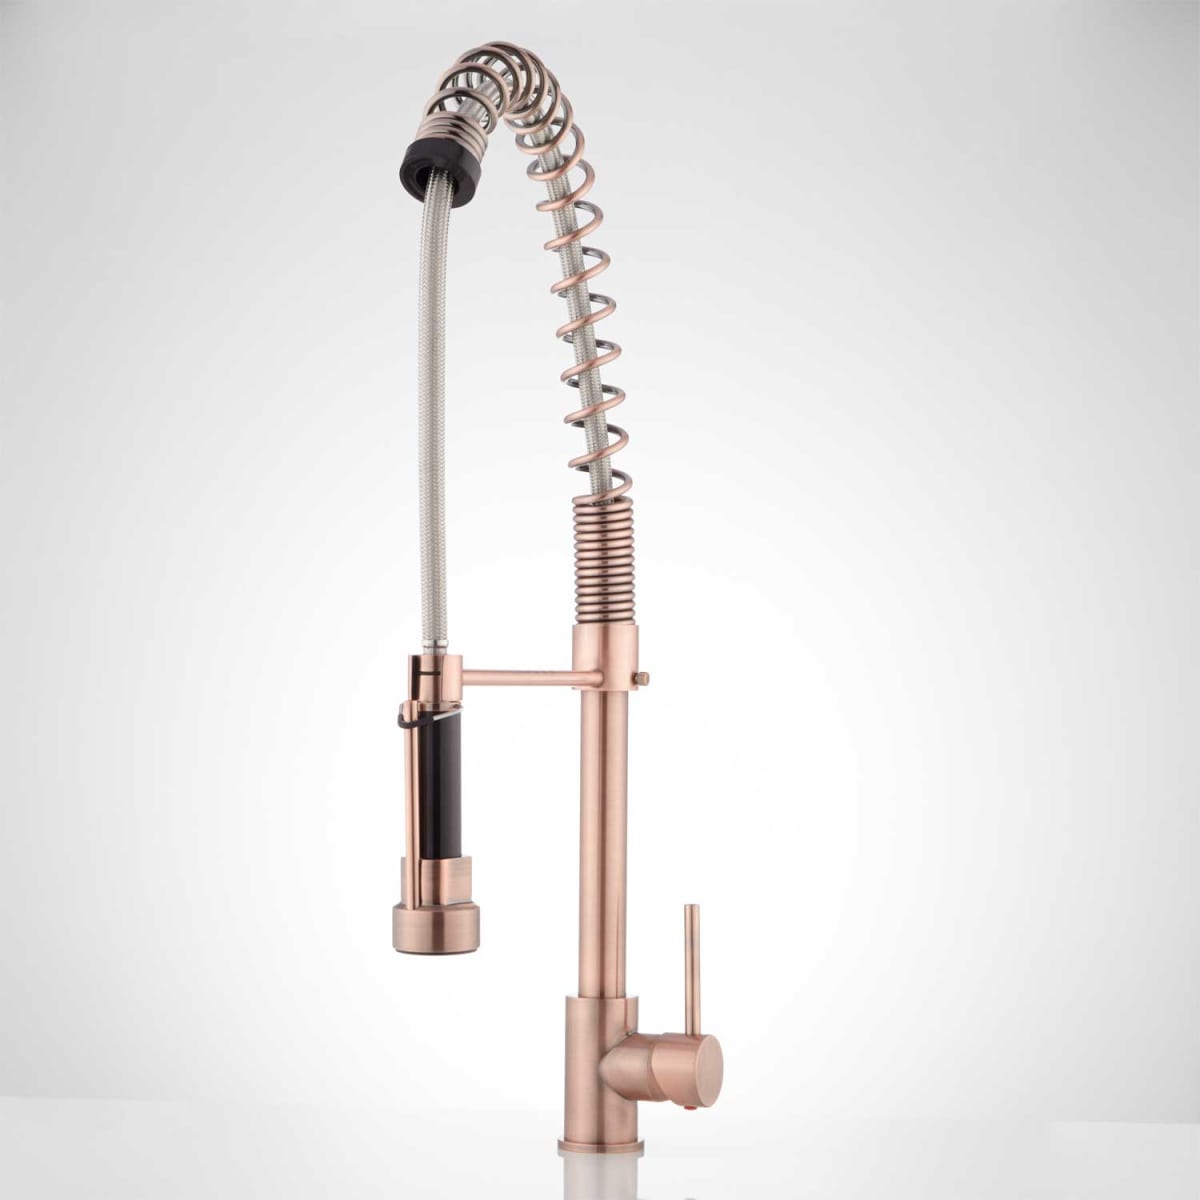 Shop Asaro 1.8 GPM Pre-Rinse Kitchen Faucet from Build.com on Openhaus